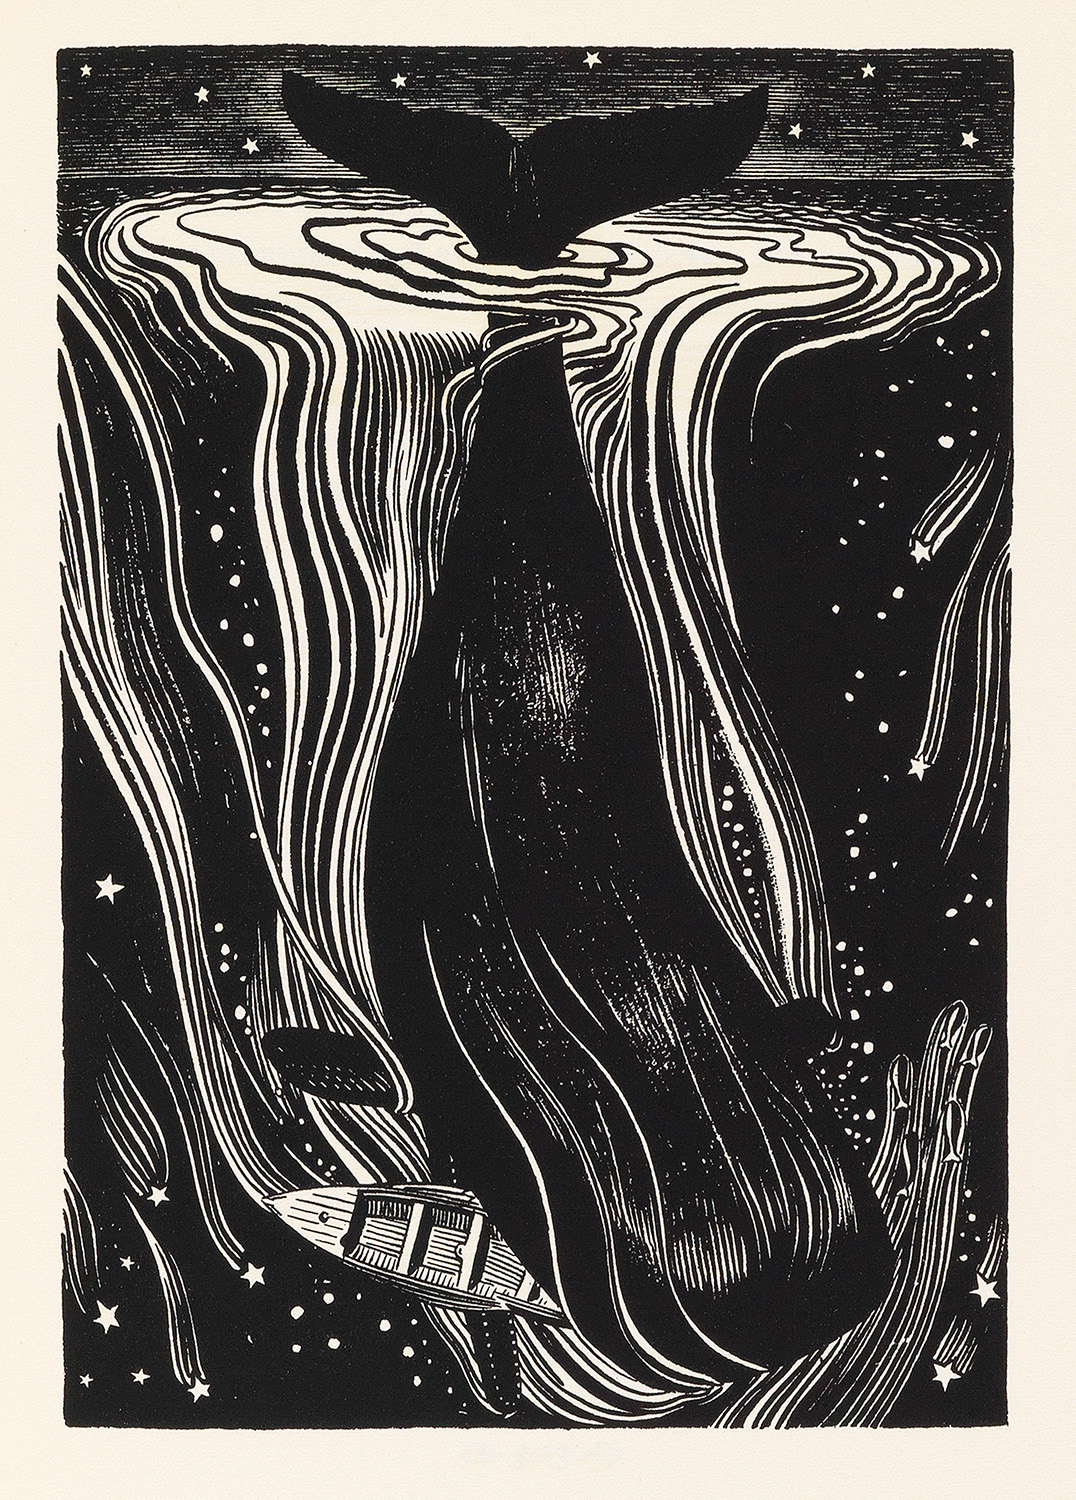 One of the 280 pen-and-ink illustrations that Rockwell Kent did for a three-volume 1930 limited edition release of Moby Dick. This particular copy lacks its aluminum slipcase.